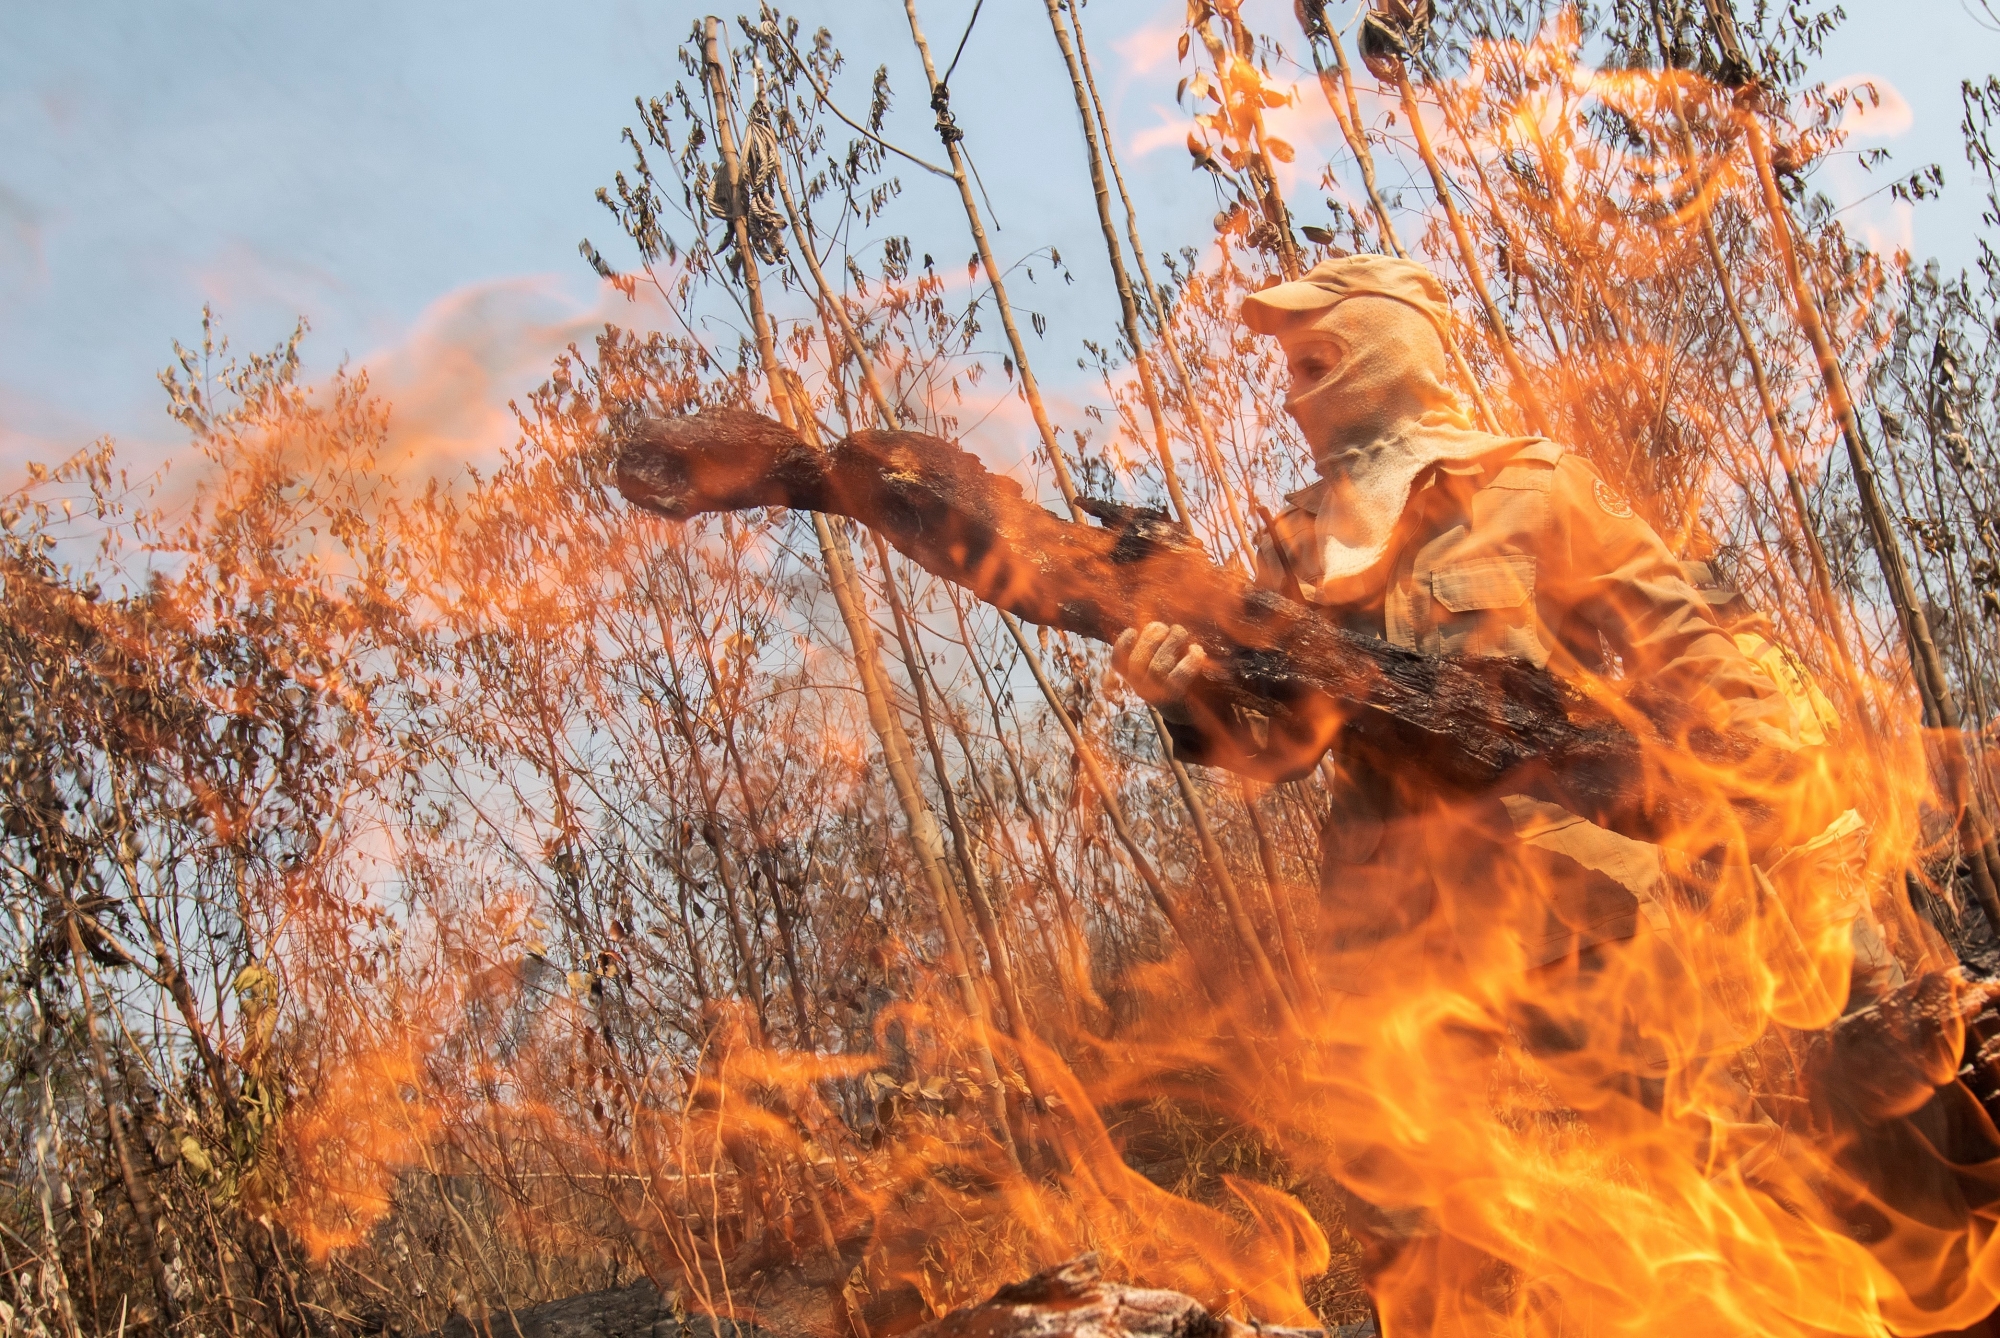 epa07799816 A fireman work to extinguish a fire at a forest near Porto Velho, Brazil, 28 August 2019. Brazil Amazon region suffer the worst fires of the last years. The government of Brazil has deployed some 40 thousand military personnel in the Amazon region.  EPA/Joedson Alves BRAZIL AMAZON FIRES